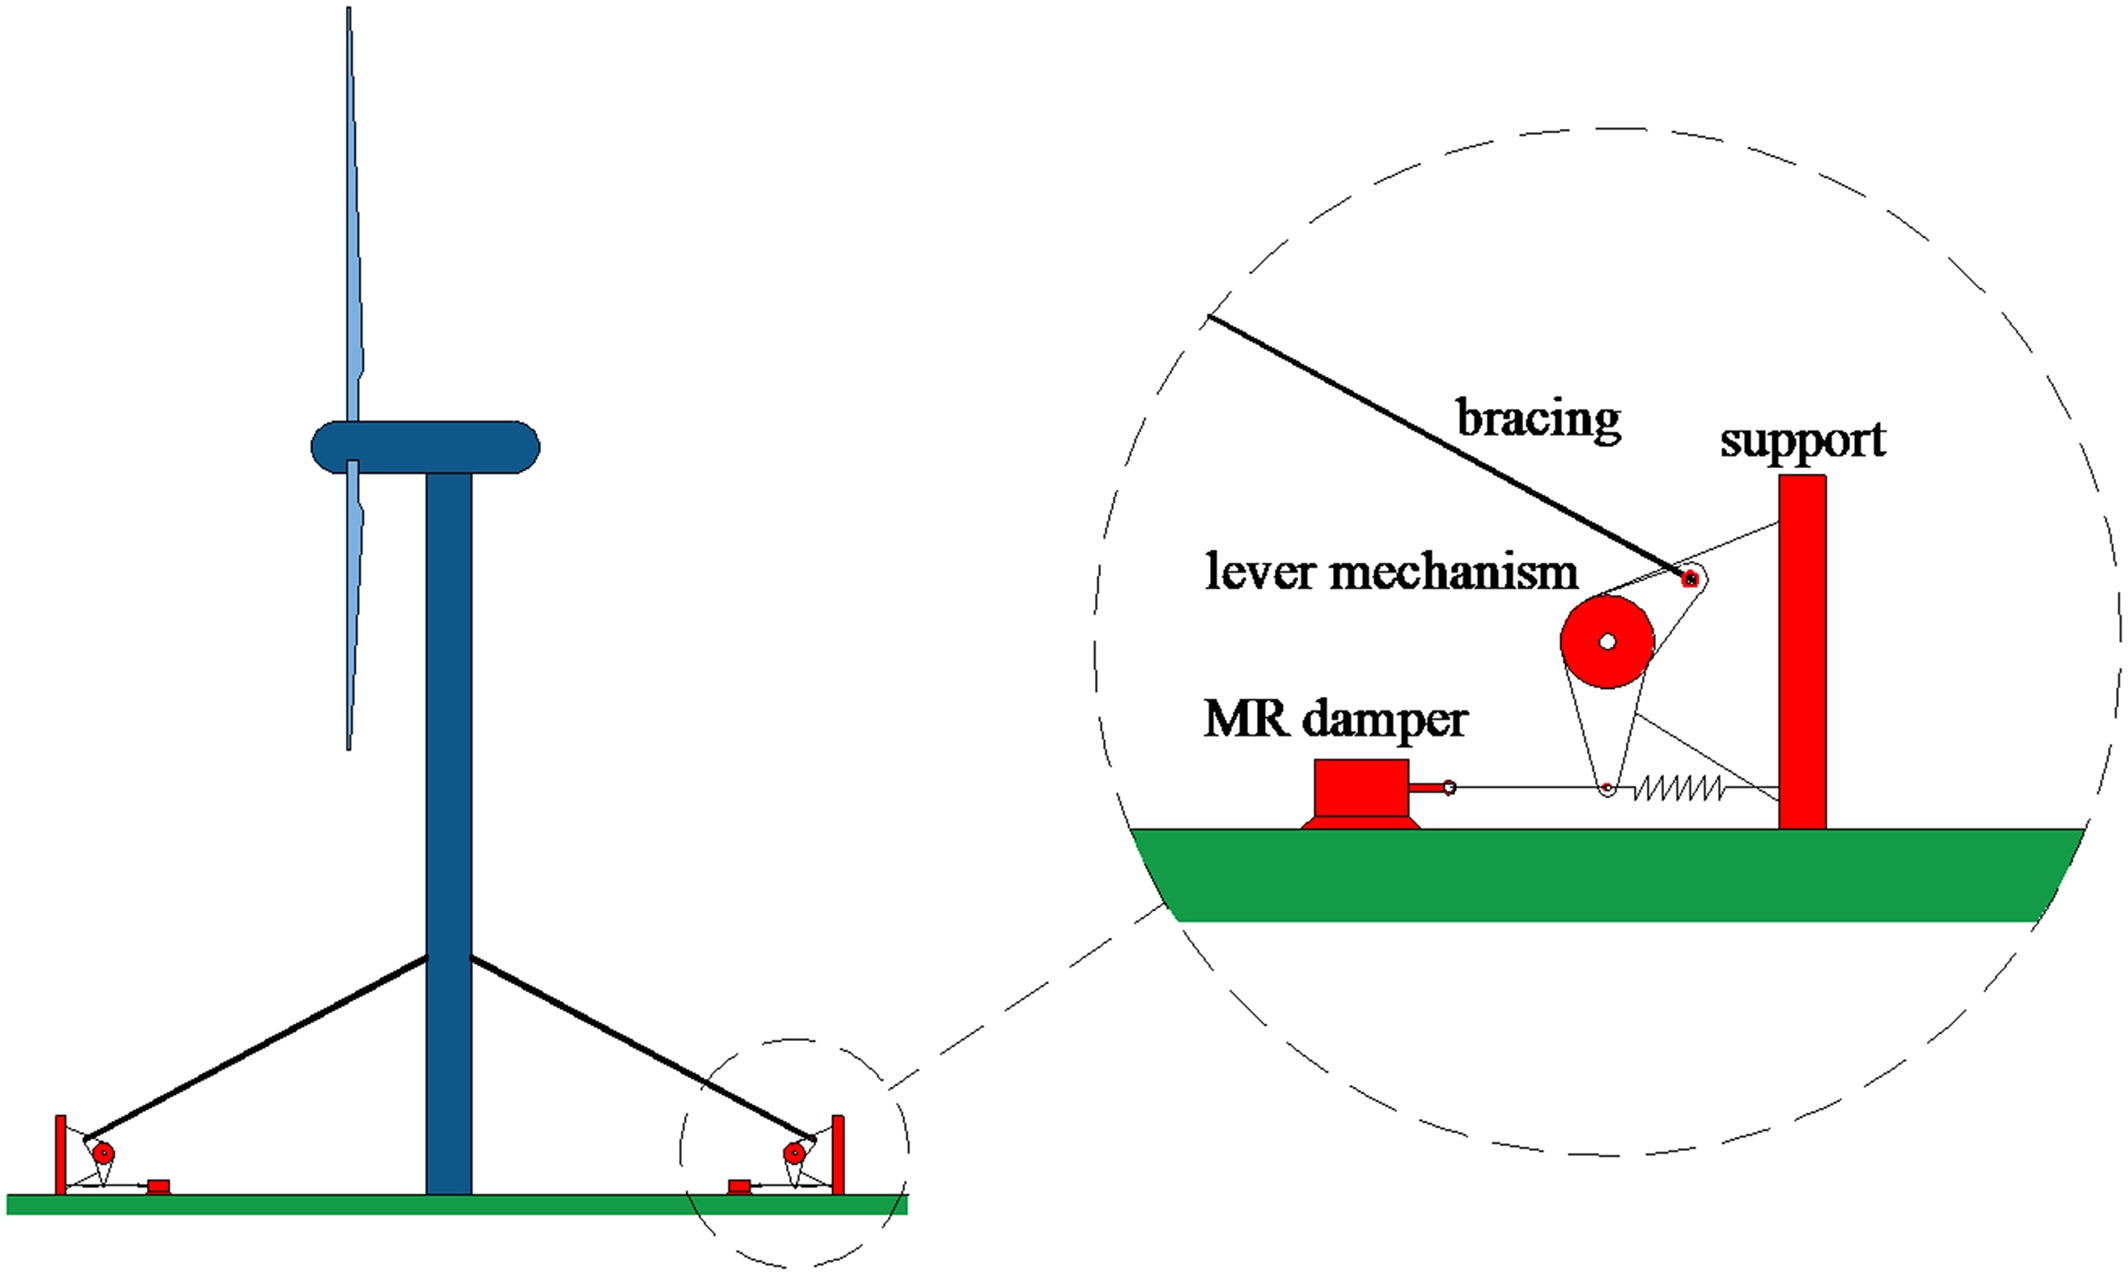 Schematic representation of the outer bracing magnetorheological (MR) damper configuration with a lever mechanism connection for displacement amplification to enhance the performance of the dampers